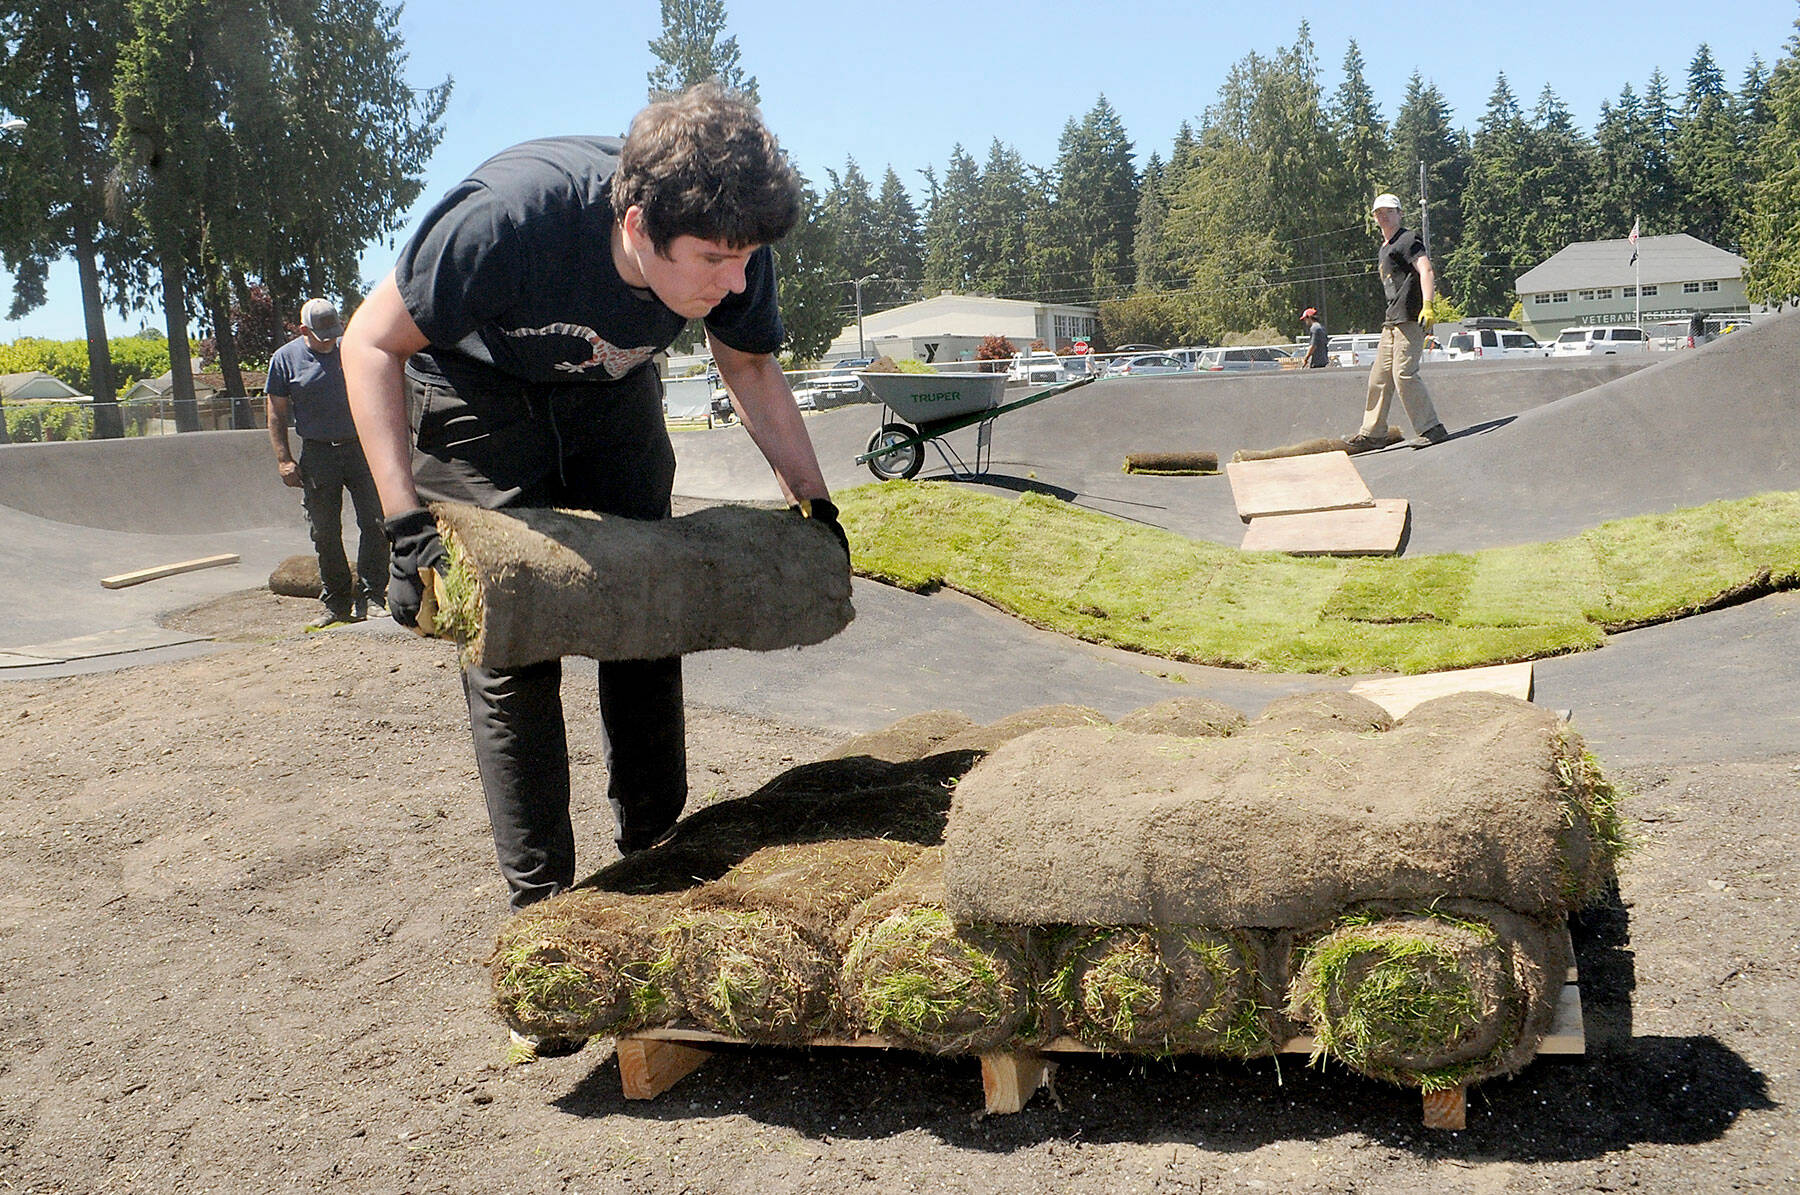 Volunteer Eric Lalonde, 15, of Port Angeles carries a roll of sod during a community work day on Friday at the pump track being built at Erickson Playfield in Port Angeles. (Keith Thorpe/Peninsula Daily News)